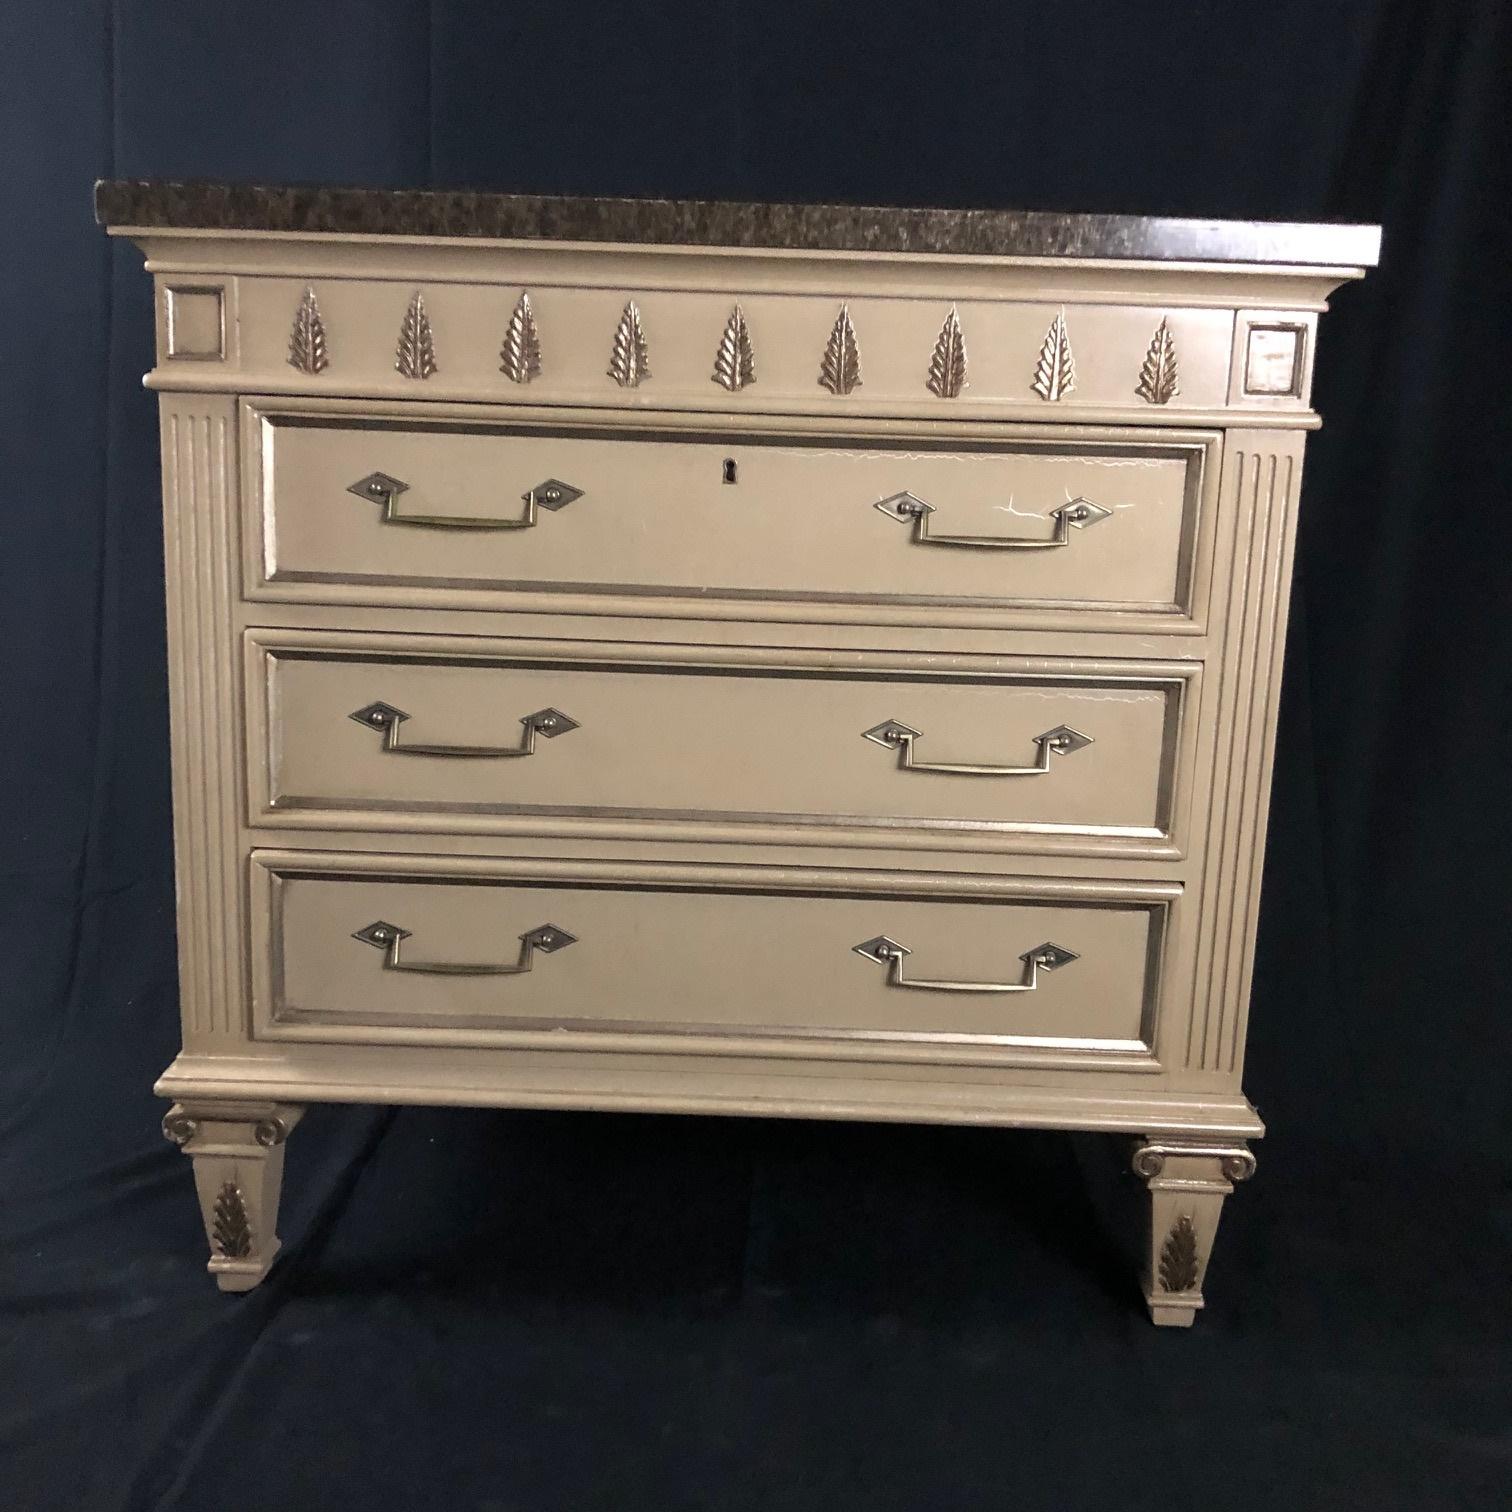 A large and handsome pair of painted mid century chests or night stands constructed of heavy solid wood, painted in an off white mottled finish with faux marble and glass tops having broad silver gilt accented aprons over long drawers. Versatile and